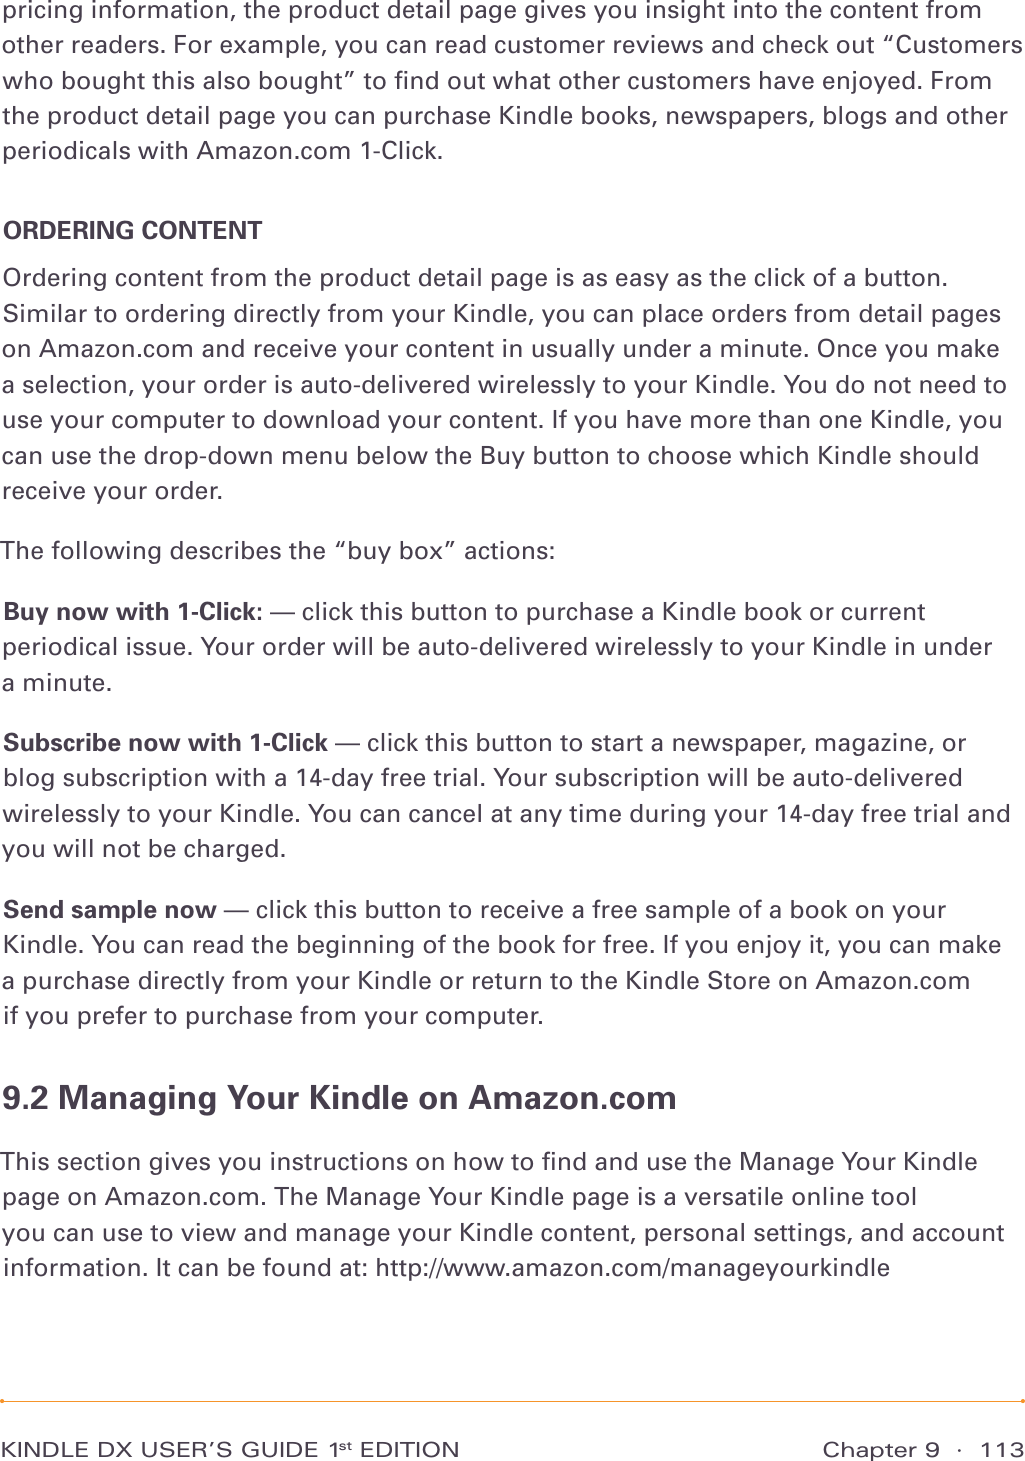 Chapter 9  ·  113KINDLE DX USER’S GUIDE 1st EDITIONpricing information, the product detail page gives you insight into the content from other readers. For example, you can read customer reviews and check out “Customers who bought this also bought” to ﬁnd out what other customers have enjoyed. From the product detail page you can purchase Kindle books, newspapers, blogs and other periodicals with Amazon.com 1-Click.ORDERING CONTENTOrdering content from the product detail page is as easy as the click of a button. Similar to ordering directly from your Kindle, you can place orders from detail pages on Amazon.com and receive your content in usually under a minute. Once you make a selection, your order is auto-delivered wirelessly to your Kindle. You do not need to use your computer to download your content. If you have more than one Kindle, you can use the drop-down menu below the Buy button to choose which Kindle should receive your order.The following describes the “buy box” actions:Buy now with 1-Click: — click this button to purchase a Kindle book or current periodical issue. Your order will be auto-delivered wirelessly to your Kindle in under  a minute.Subscribe now with 1-Click — click this button to start a newspaper, magazine, or blog subscription with a 14-day free trial. Your subscription will be auto-delivered wirelessly to your Kindle. You can cancel at any time during your 14-day free trial and you will not be charged.Send sample now — click this button to receive a free sample of a book on your Kindle. You can read the beginning of the book for free. If you enjoy it, you can make  a purchase directly from your Kindle or return to the Kindle Store on Amazon.com  if you prefer to purchase from your computer.9.2 Managing Your Kindle on Amazon.comThis section gives you instructions on how to ﬁnd and use the Manage Your Kindle page on Amazon.com. The Manage Your Kindle page is a versatile online tool  you can use to view and manage your Kindle content, personal settings, and account information. It can be found at: http://www.amazon.com/manageyourkindle 